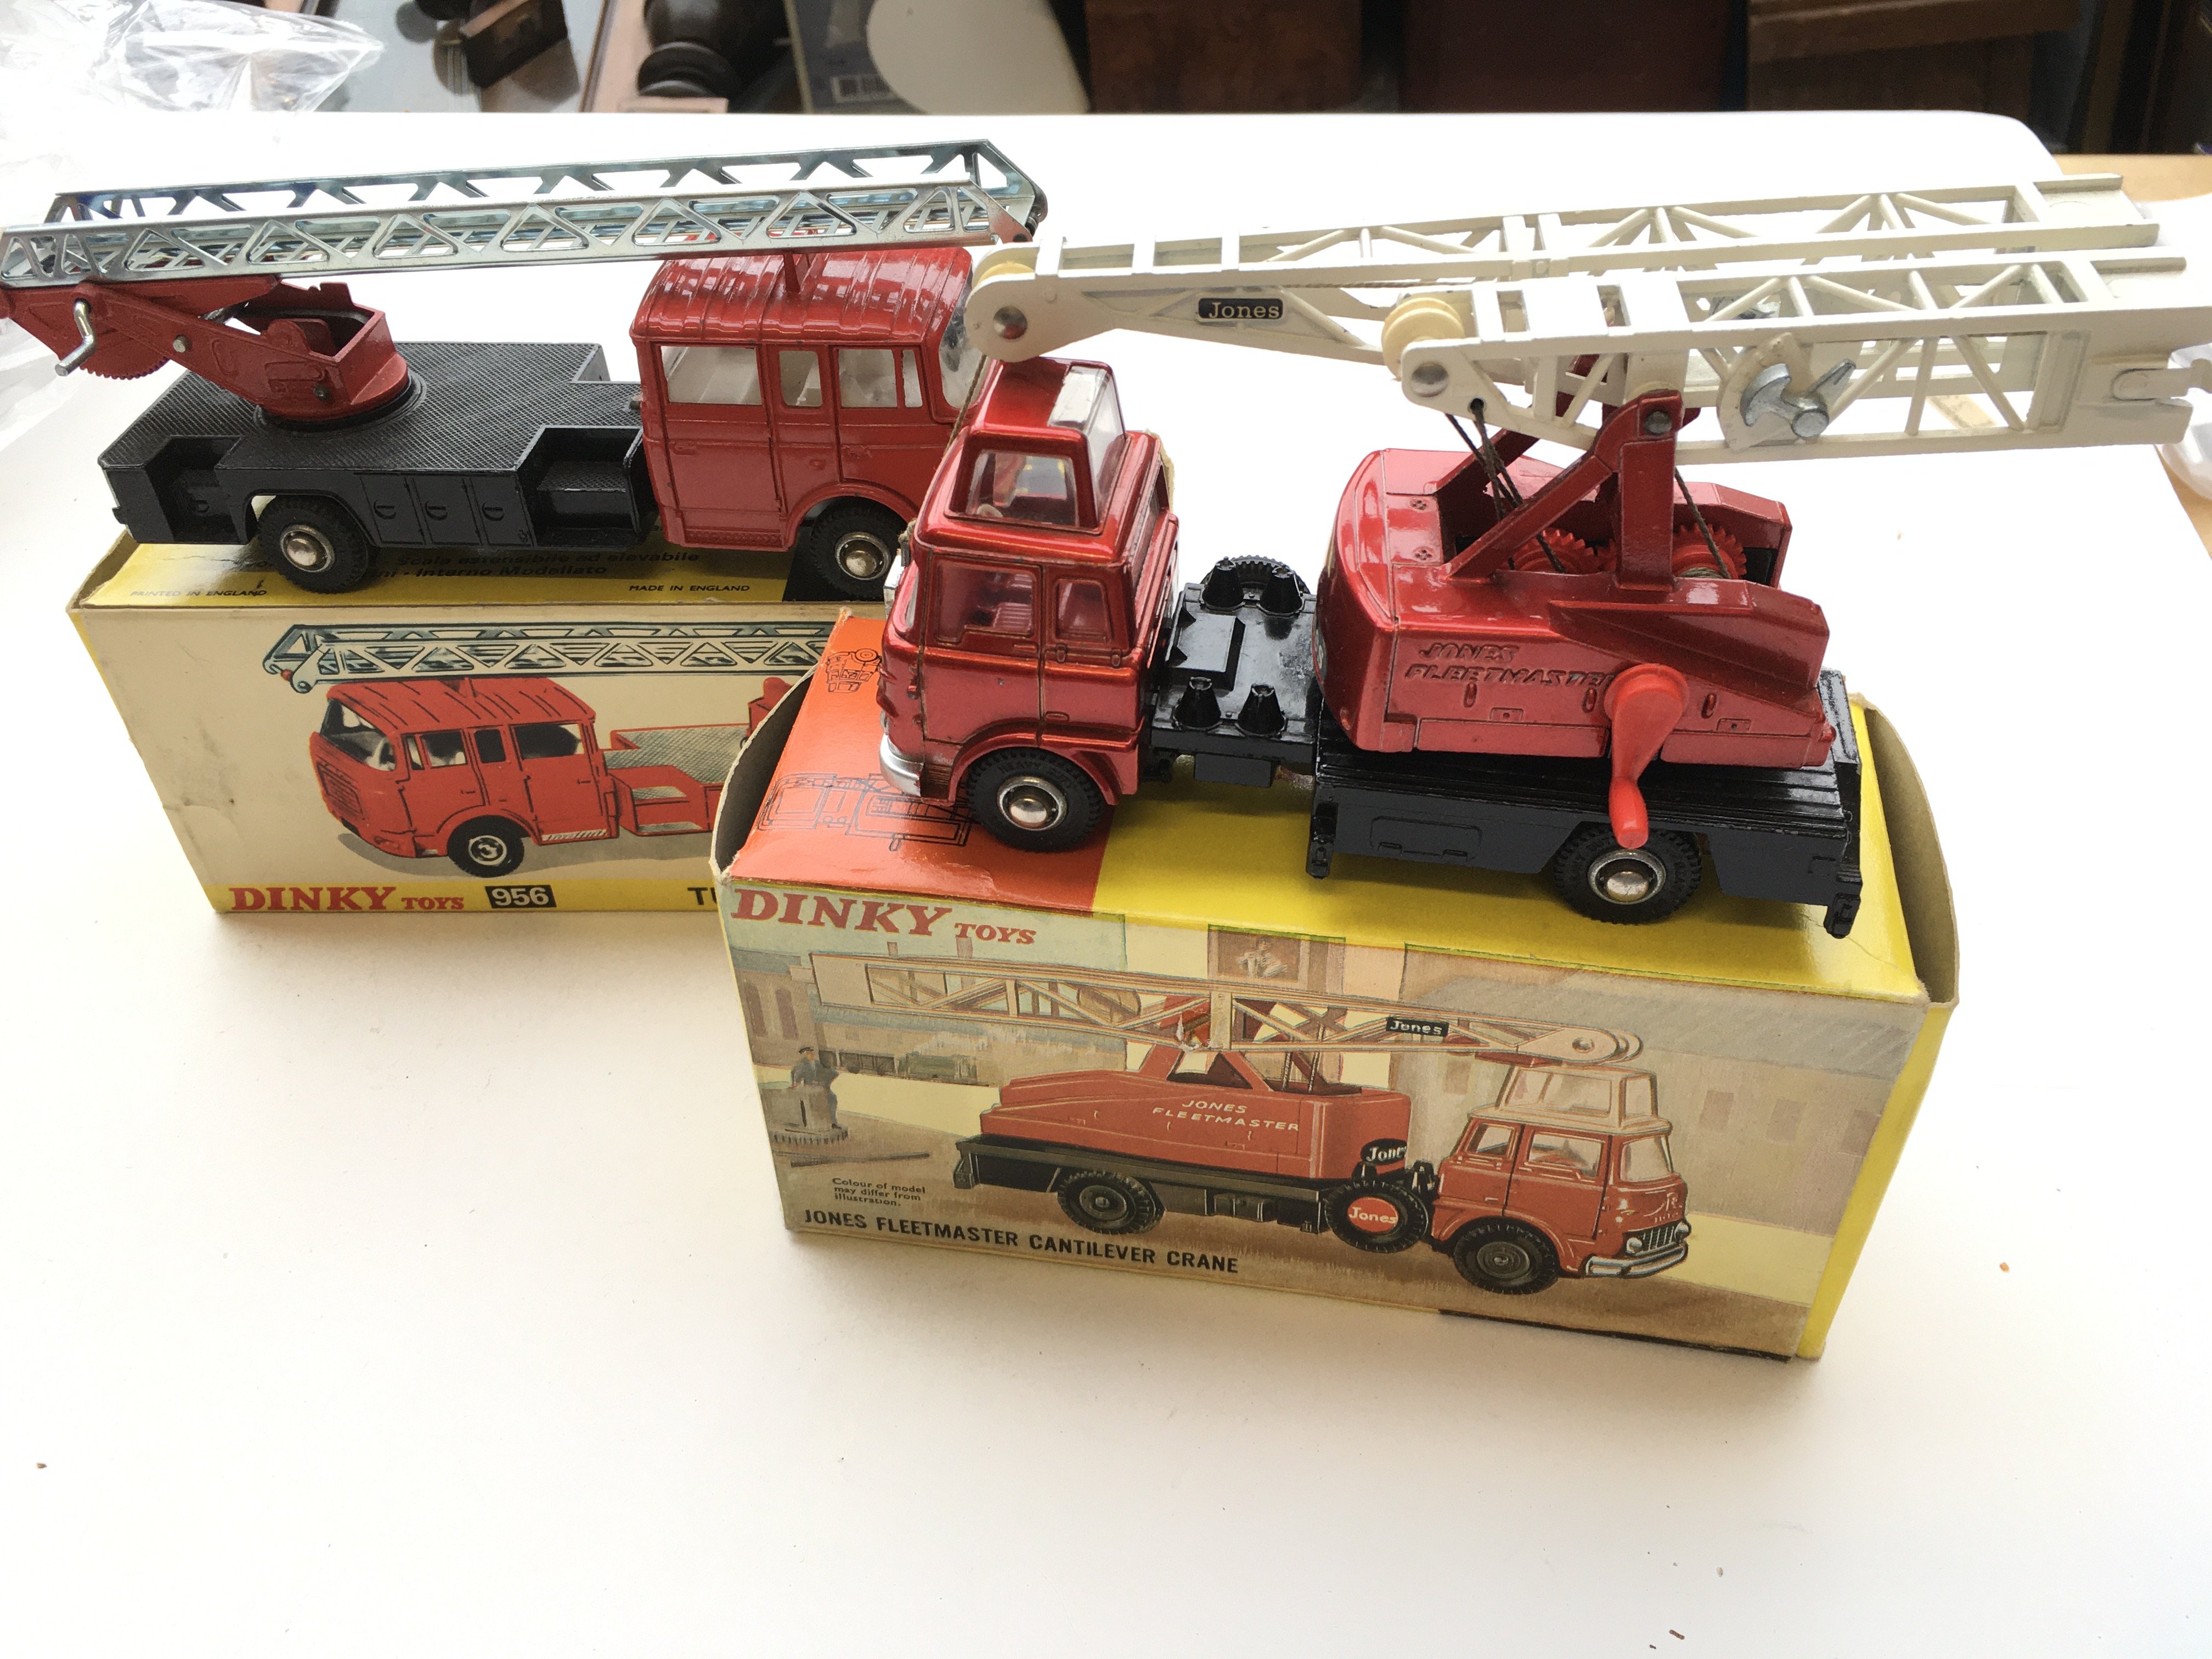 A Dinky Turntable Fire Escape truck #956 and a Jon